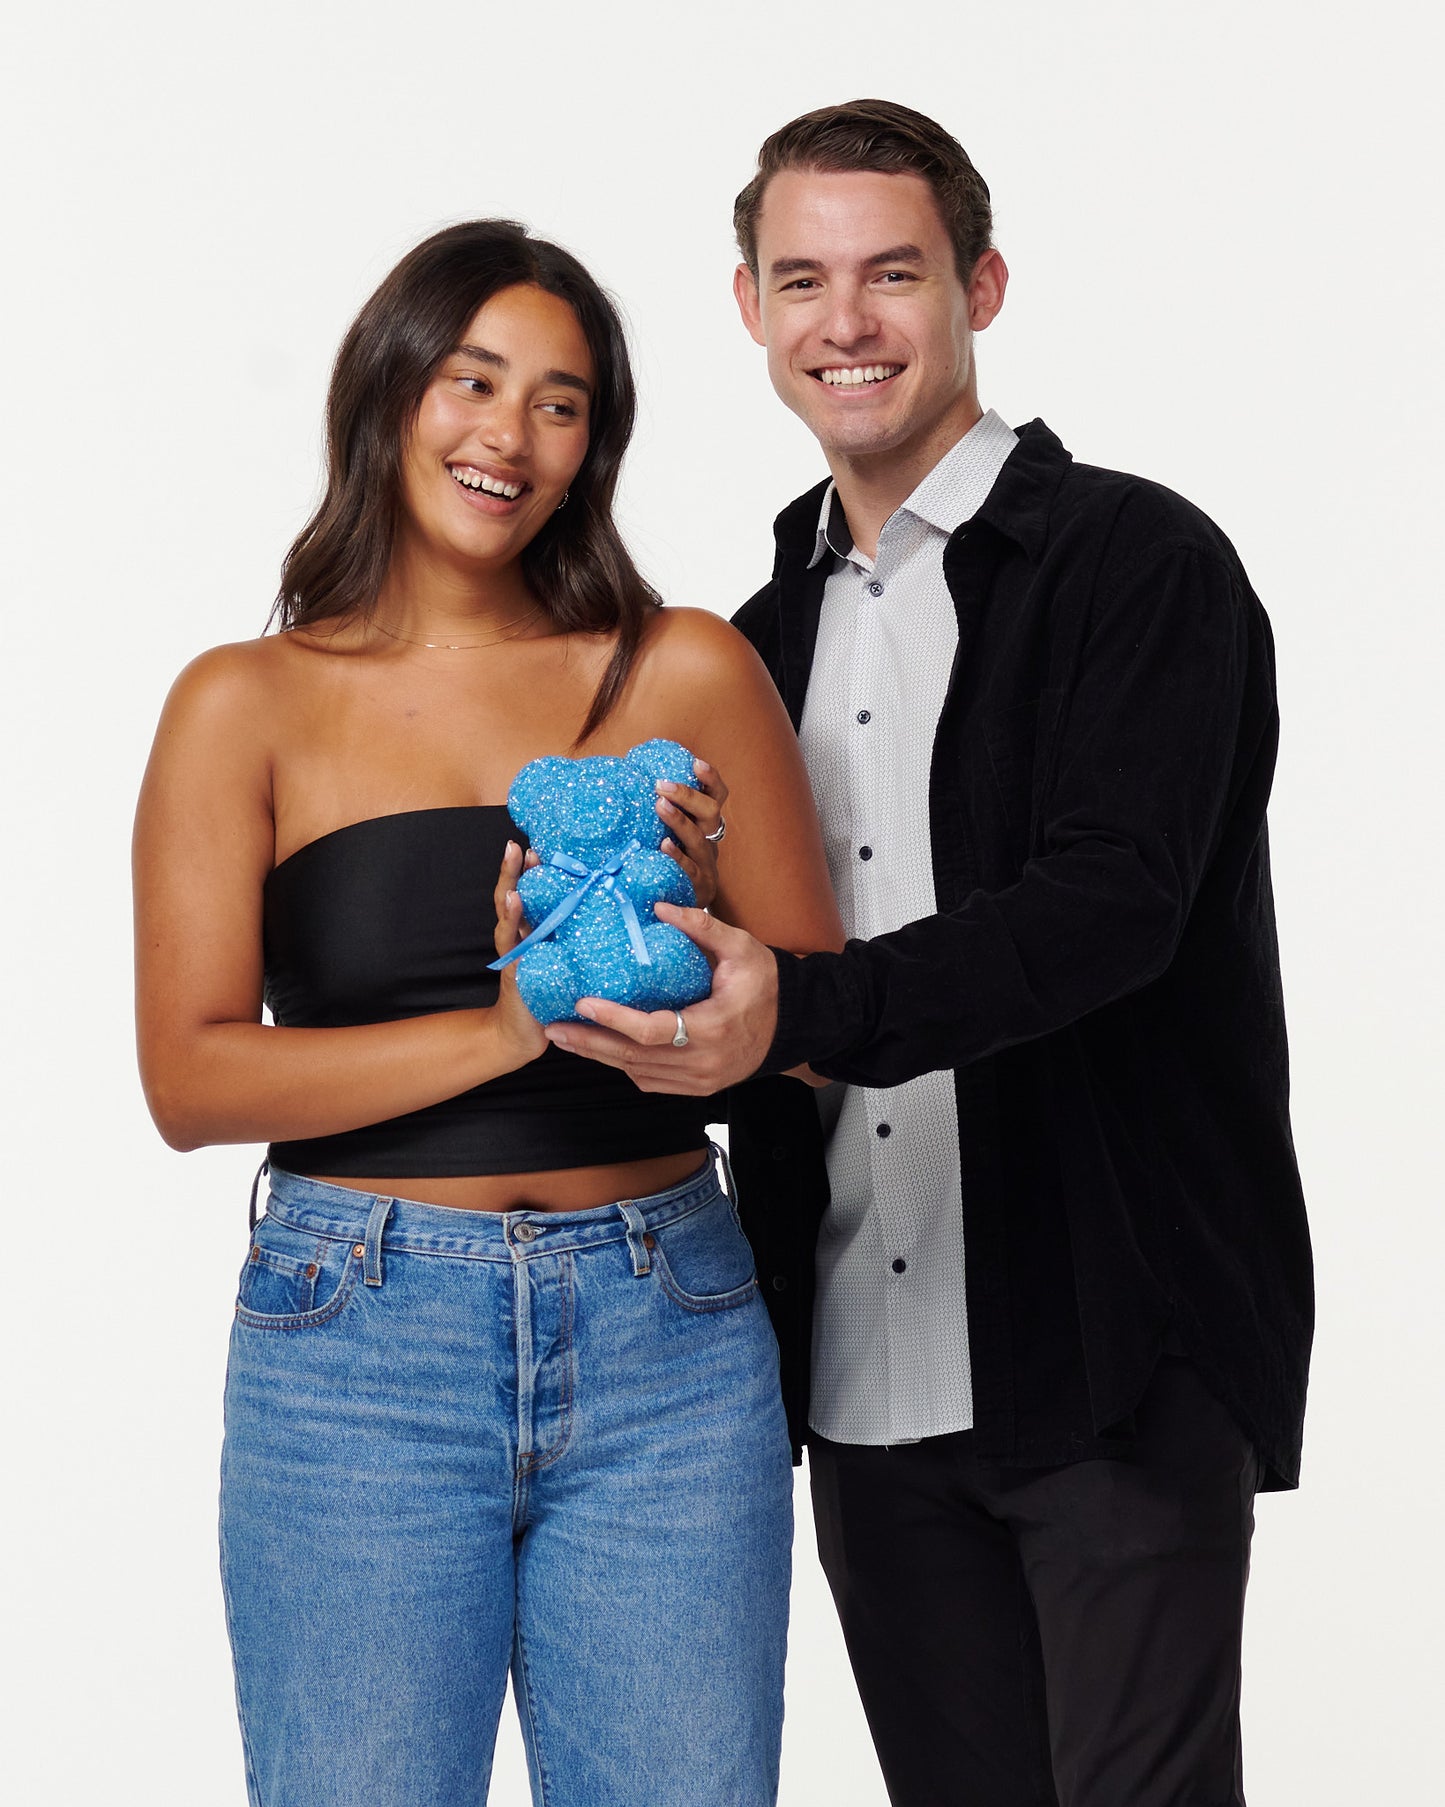 A woman in a black cropped top and blue jeans cradles a blue, sparkly teddy bear with a gentle smile. Next to her, a man in a black jacket and white shirt shares a warm smile, his hands on the teddy bear, as they both enjoy the moment together.